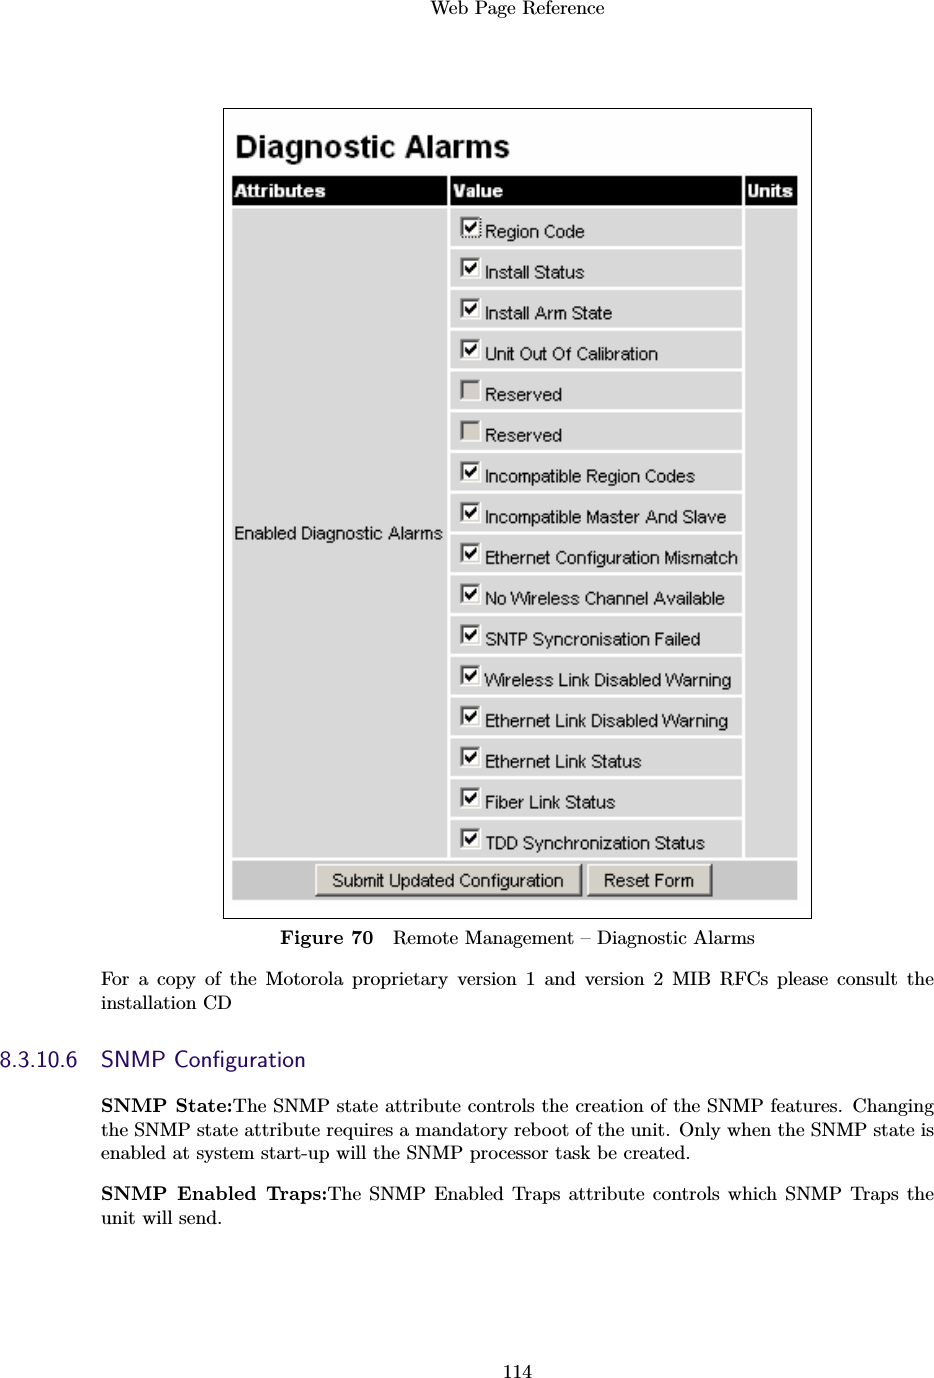 Web Page Reference114Figure 70 Remote Management – Diagnostic AlarmsFor a copy of the Motorola proprietary version 1 and version 2 MIB RFCs please consult theinstallation CD8.3.10.6 SNMP ConﬁgurationSNMP State:The SNMP state attribute controls the creation of the SNMP features. Changingthe SNMP state attribute requires a mandatory reboot of the unit. Only when the SNMP state isenabled at system start-up will the SNMP processor task be created.SNMP Enabled Traps:The SNMP Enabled Traps attribute controls which SNMP Traps theunit will send.